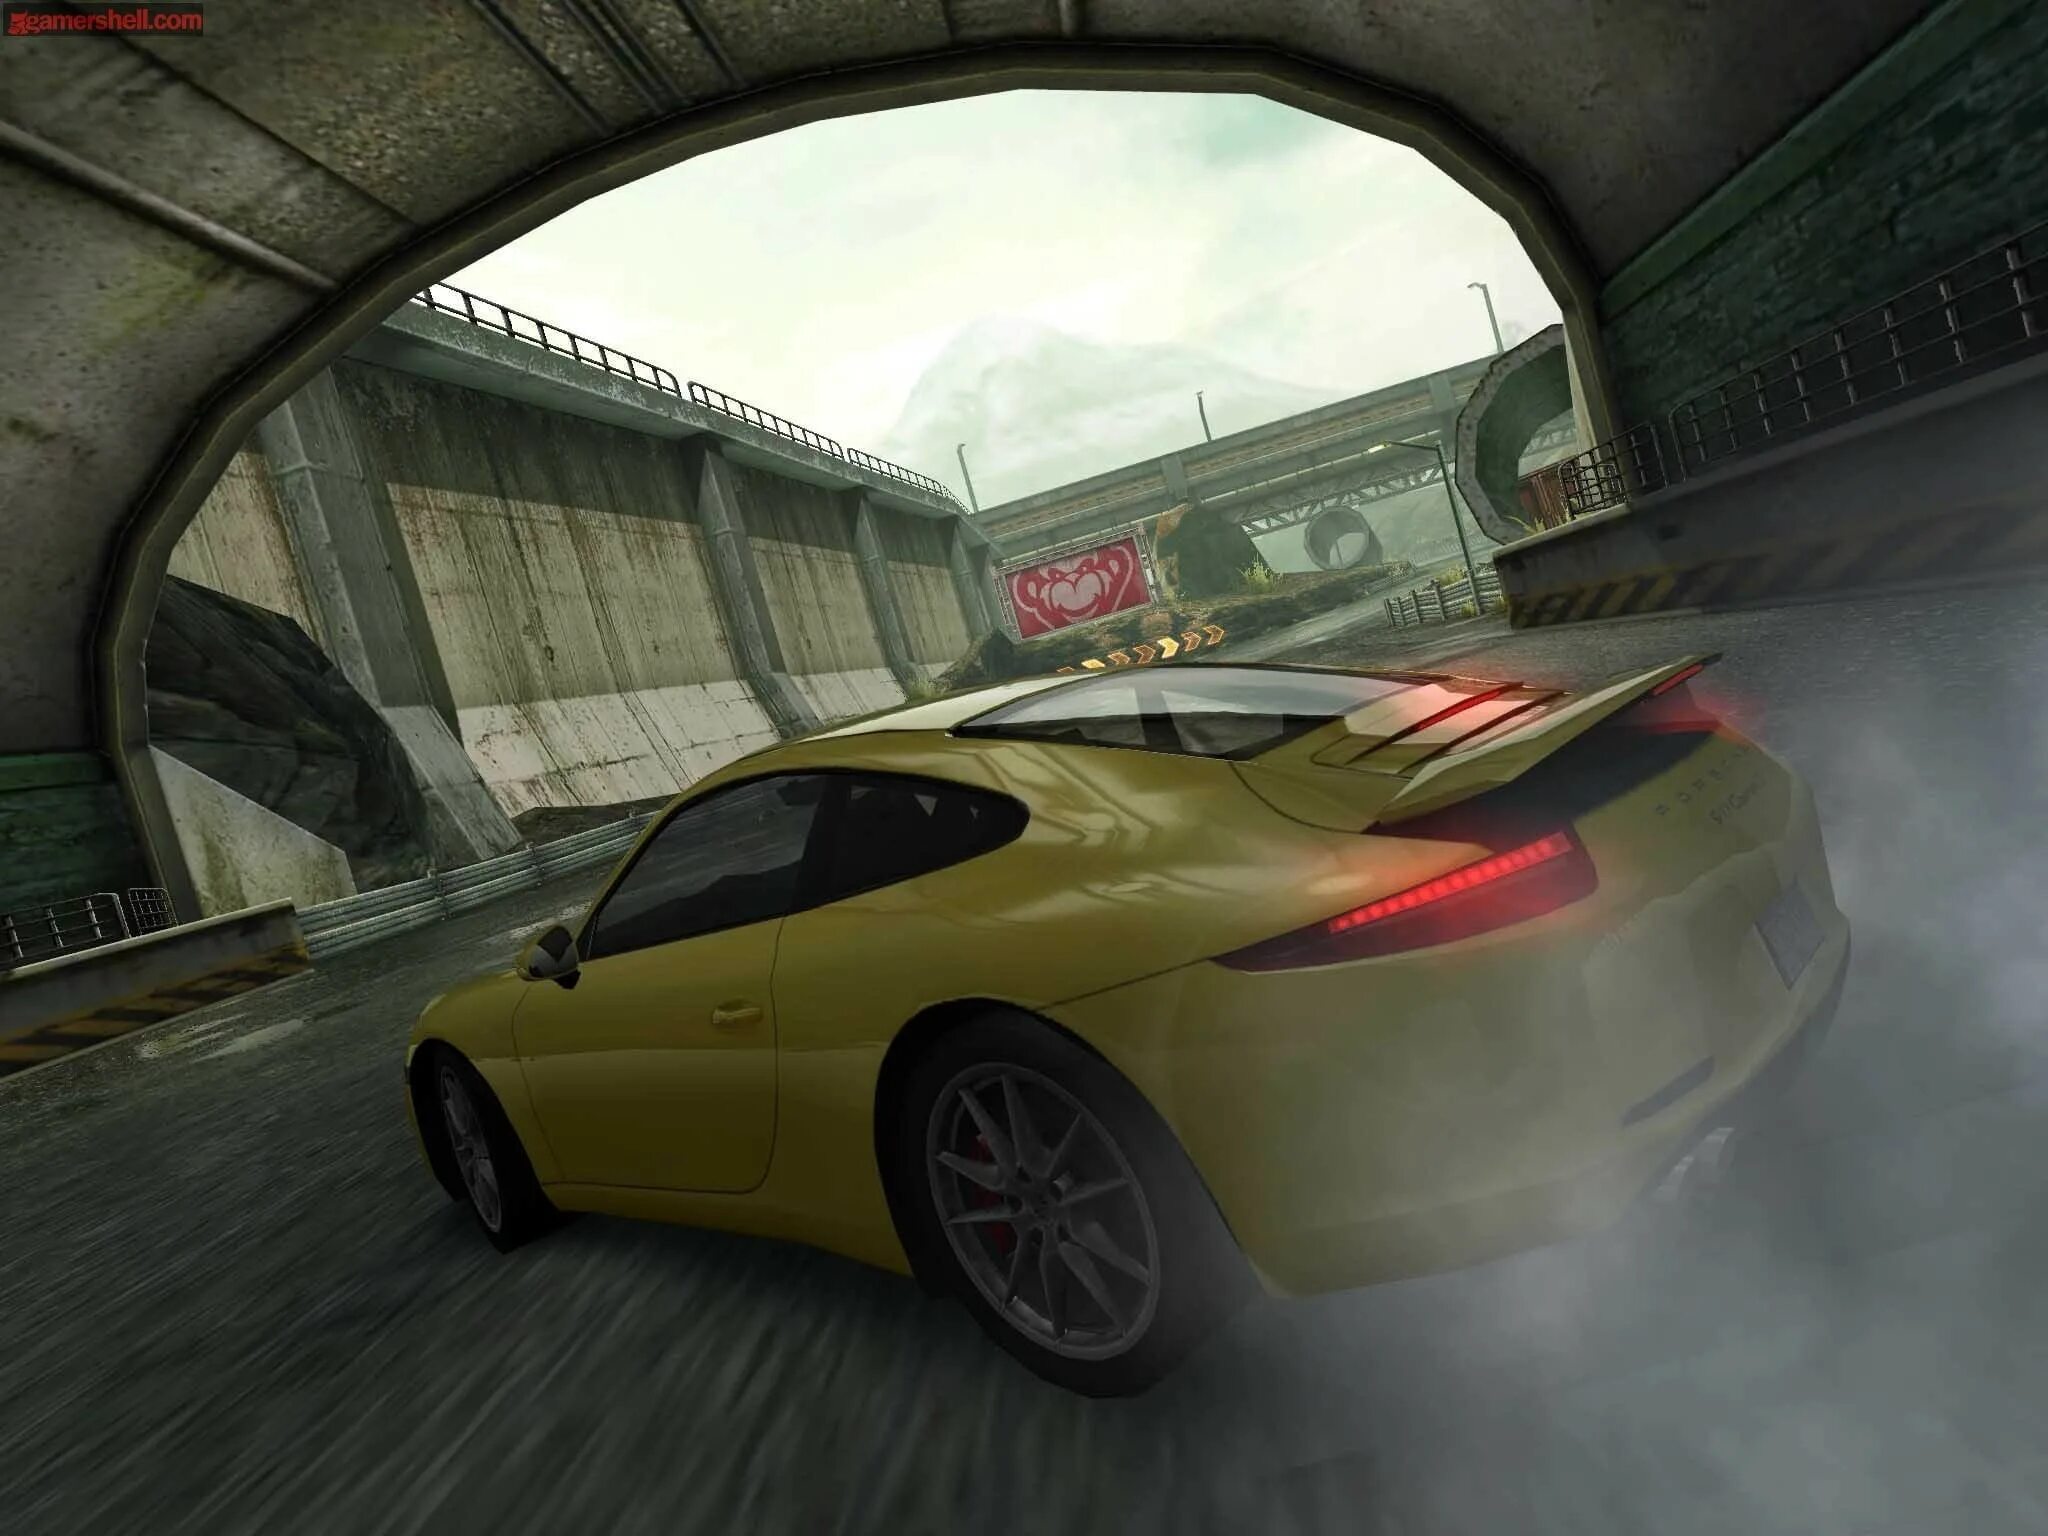 Nfs most wanted mobile 2005. Need for Speed most wanted 2012. NFS MW 2012 Android. NFS most wanted 2012 IOS. Нид фор СПИД мост вонтед2012.